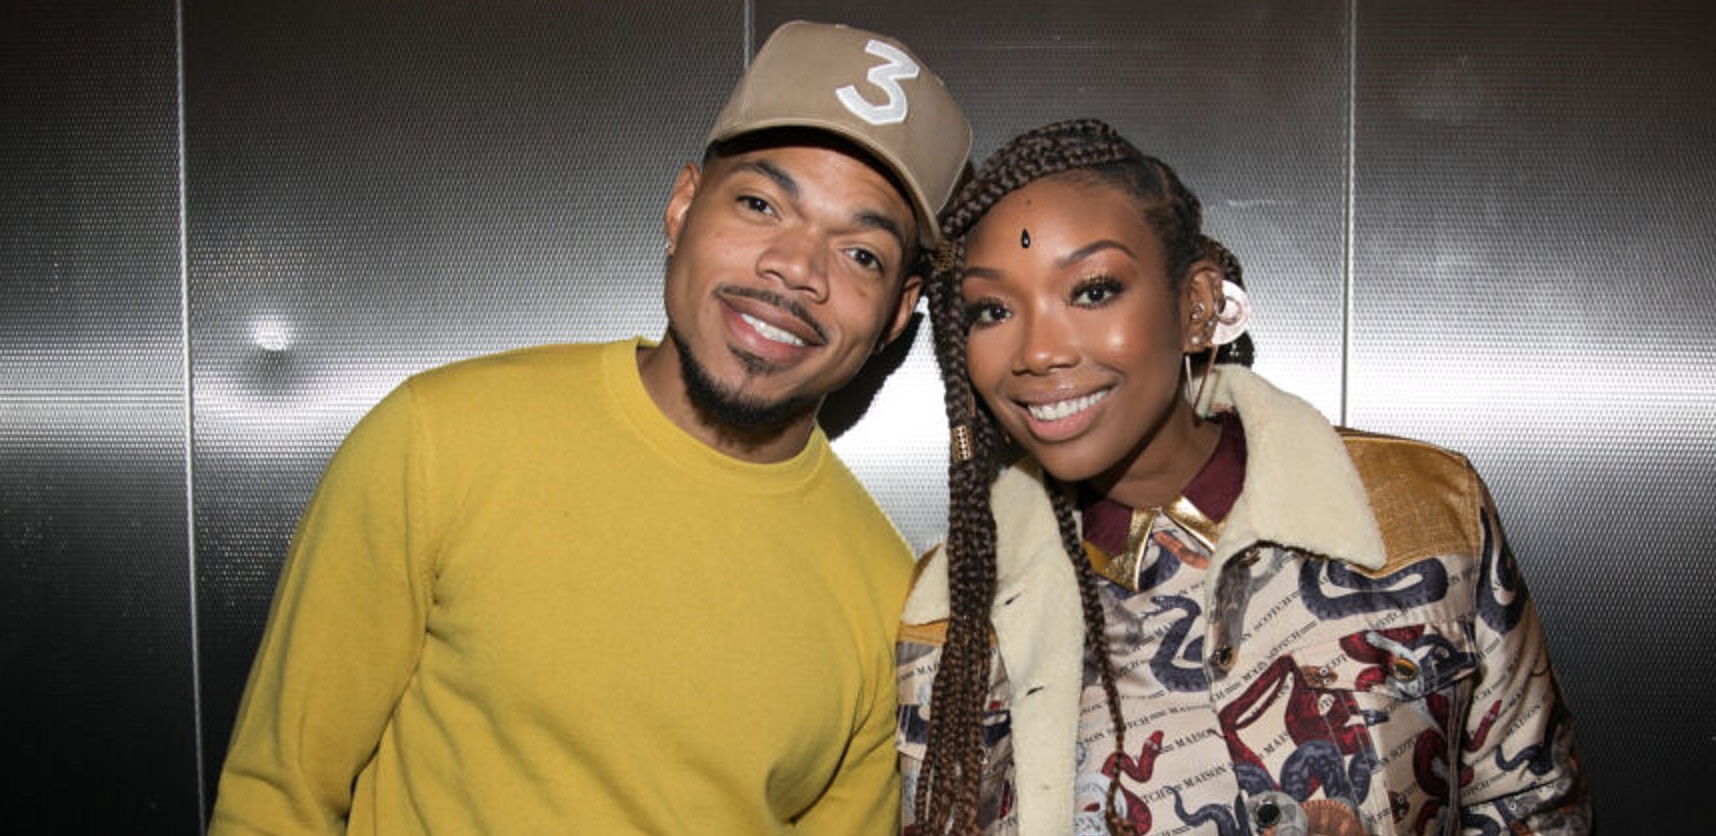 Teaser Listen: Brandy’s New Song With Chance The Rapper Entitled ‘Baby Mama’